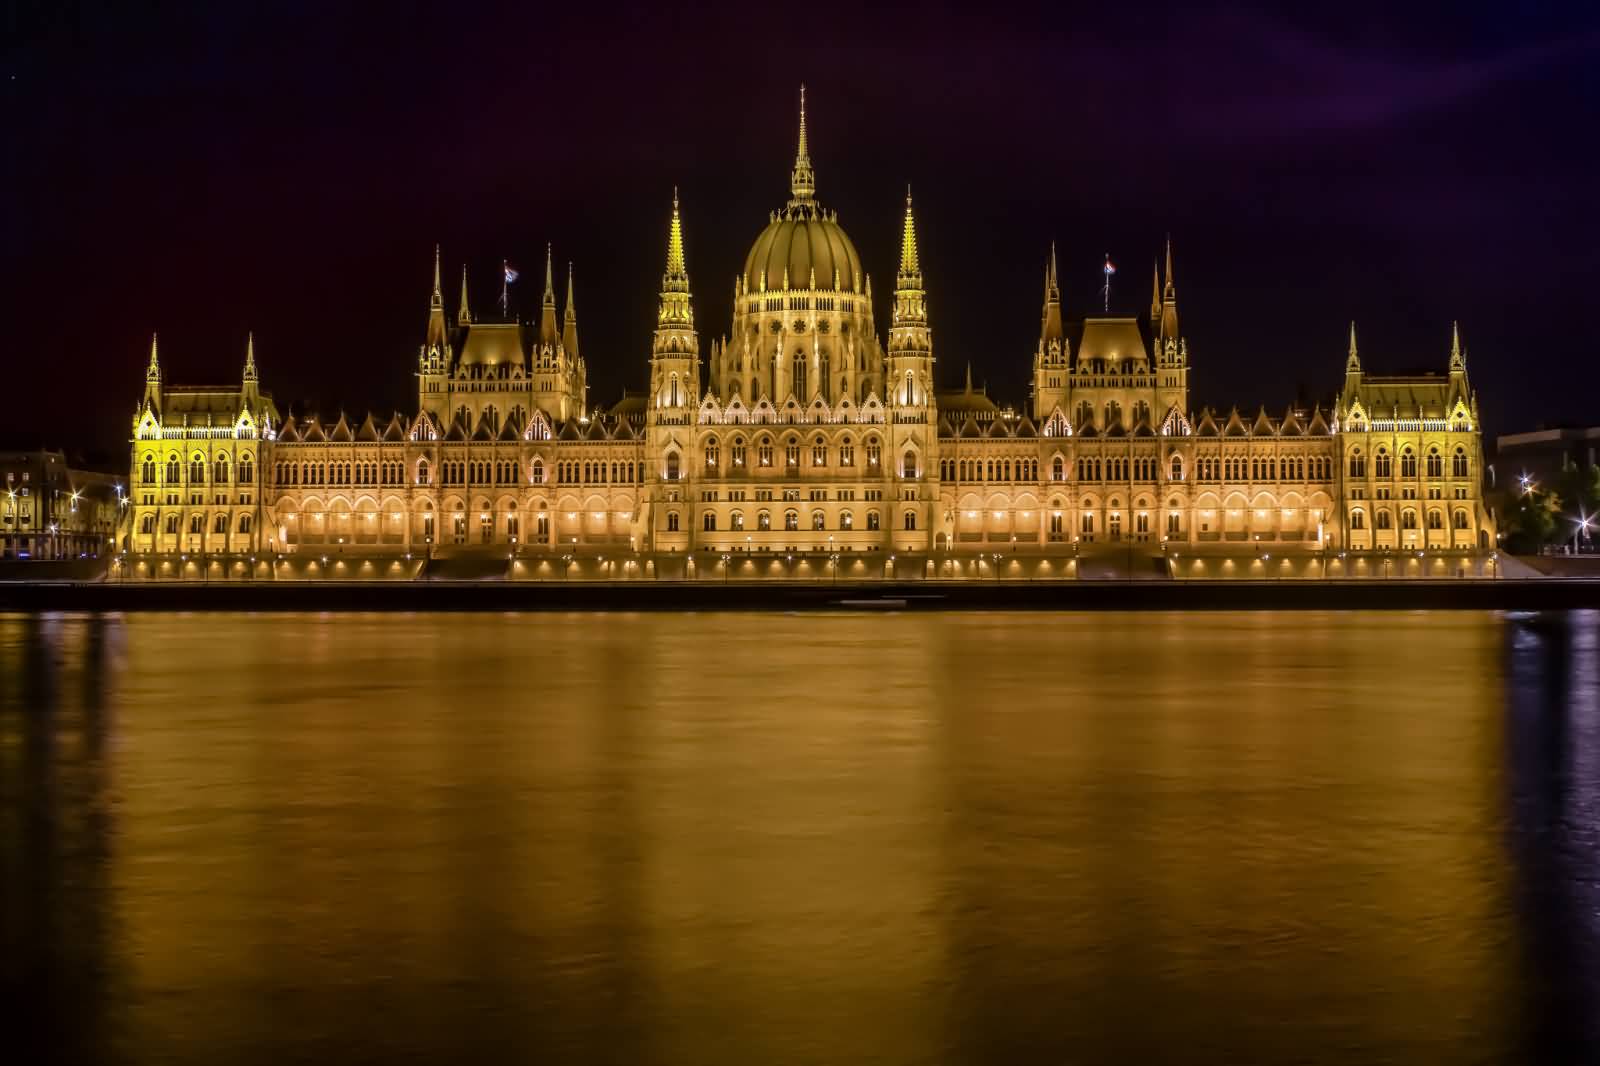 Night View Of The Hungarian Parliament Building